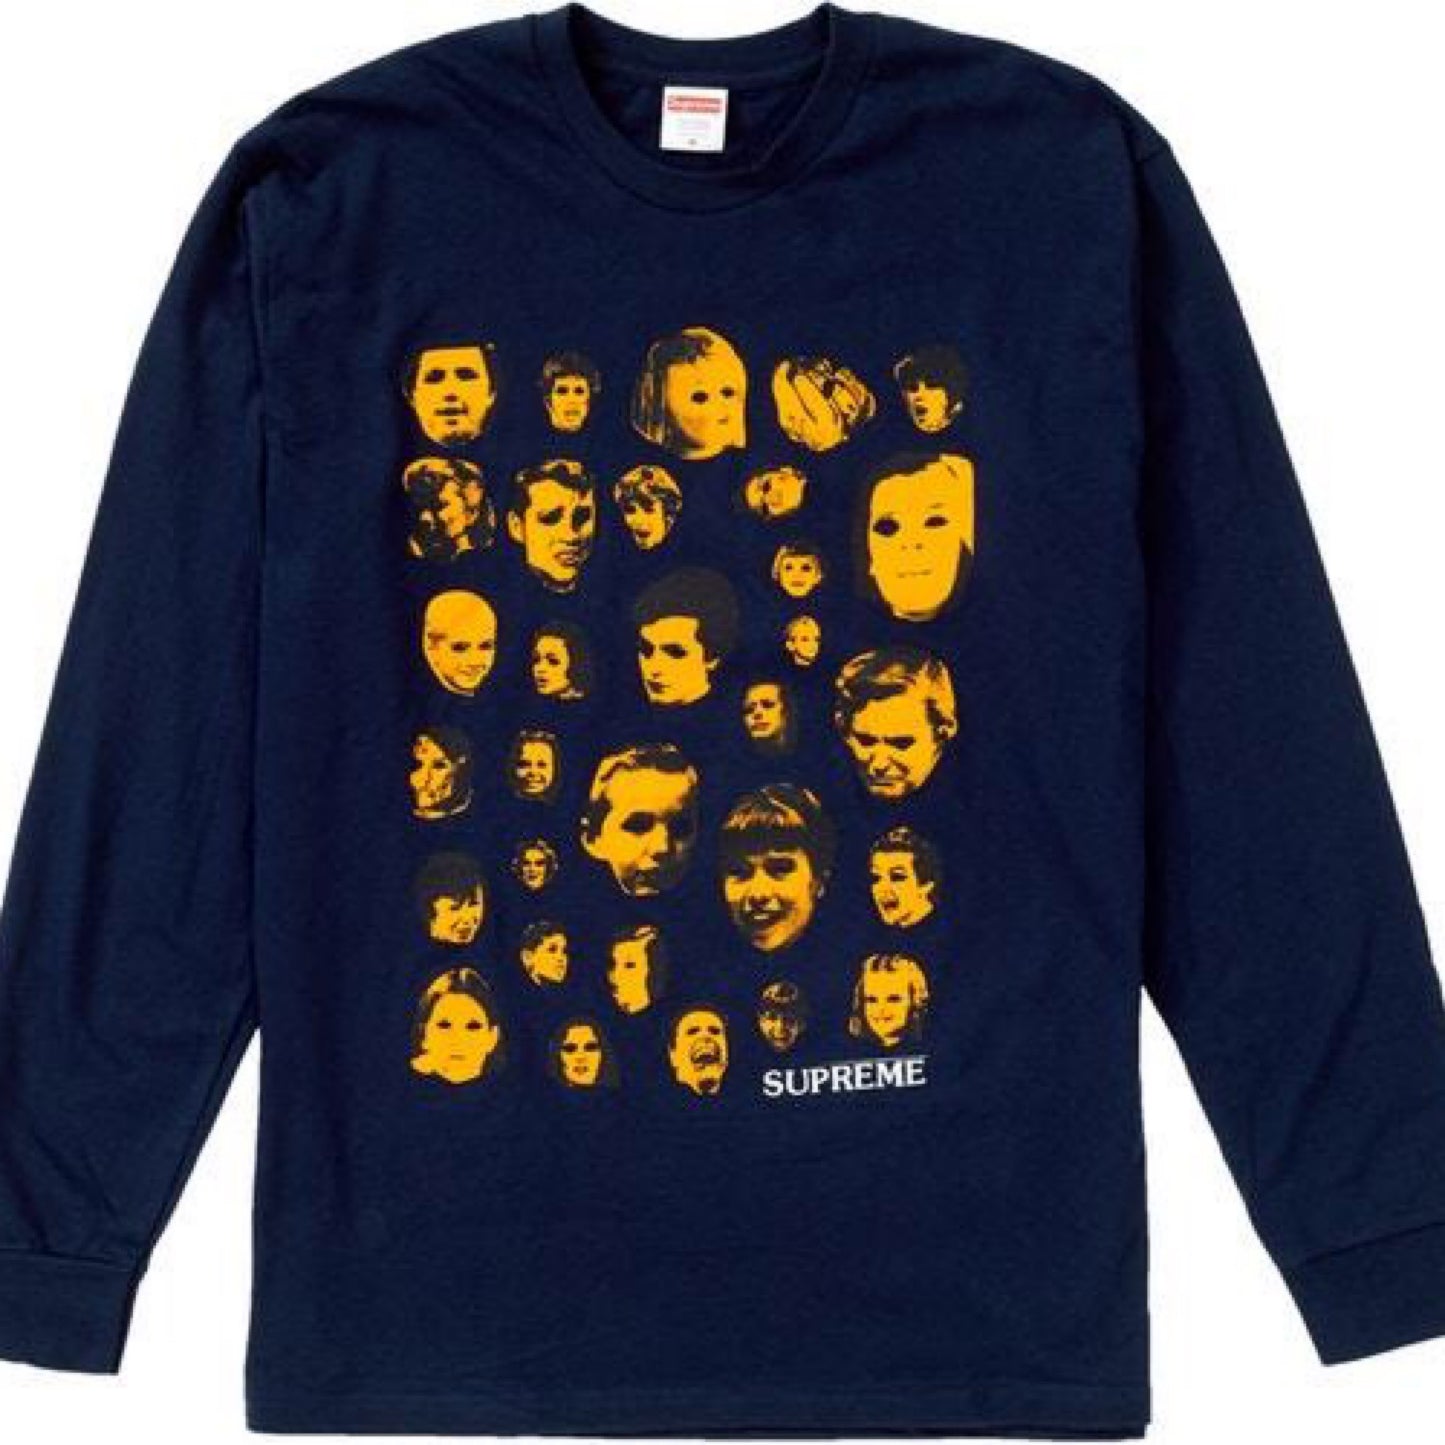 Supreme faces long sleeve tee navy - Centrall Online